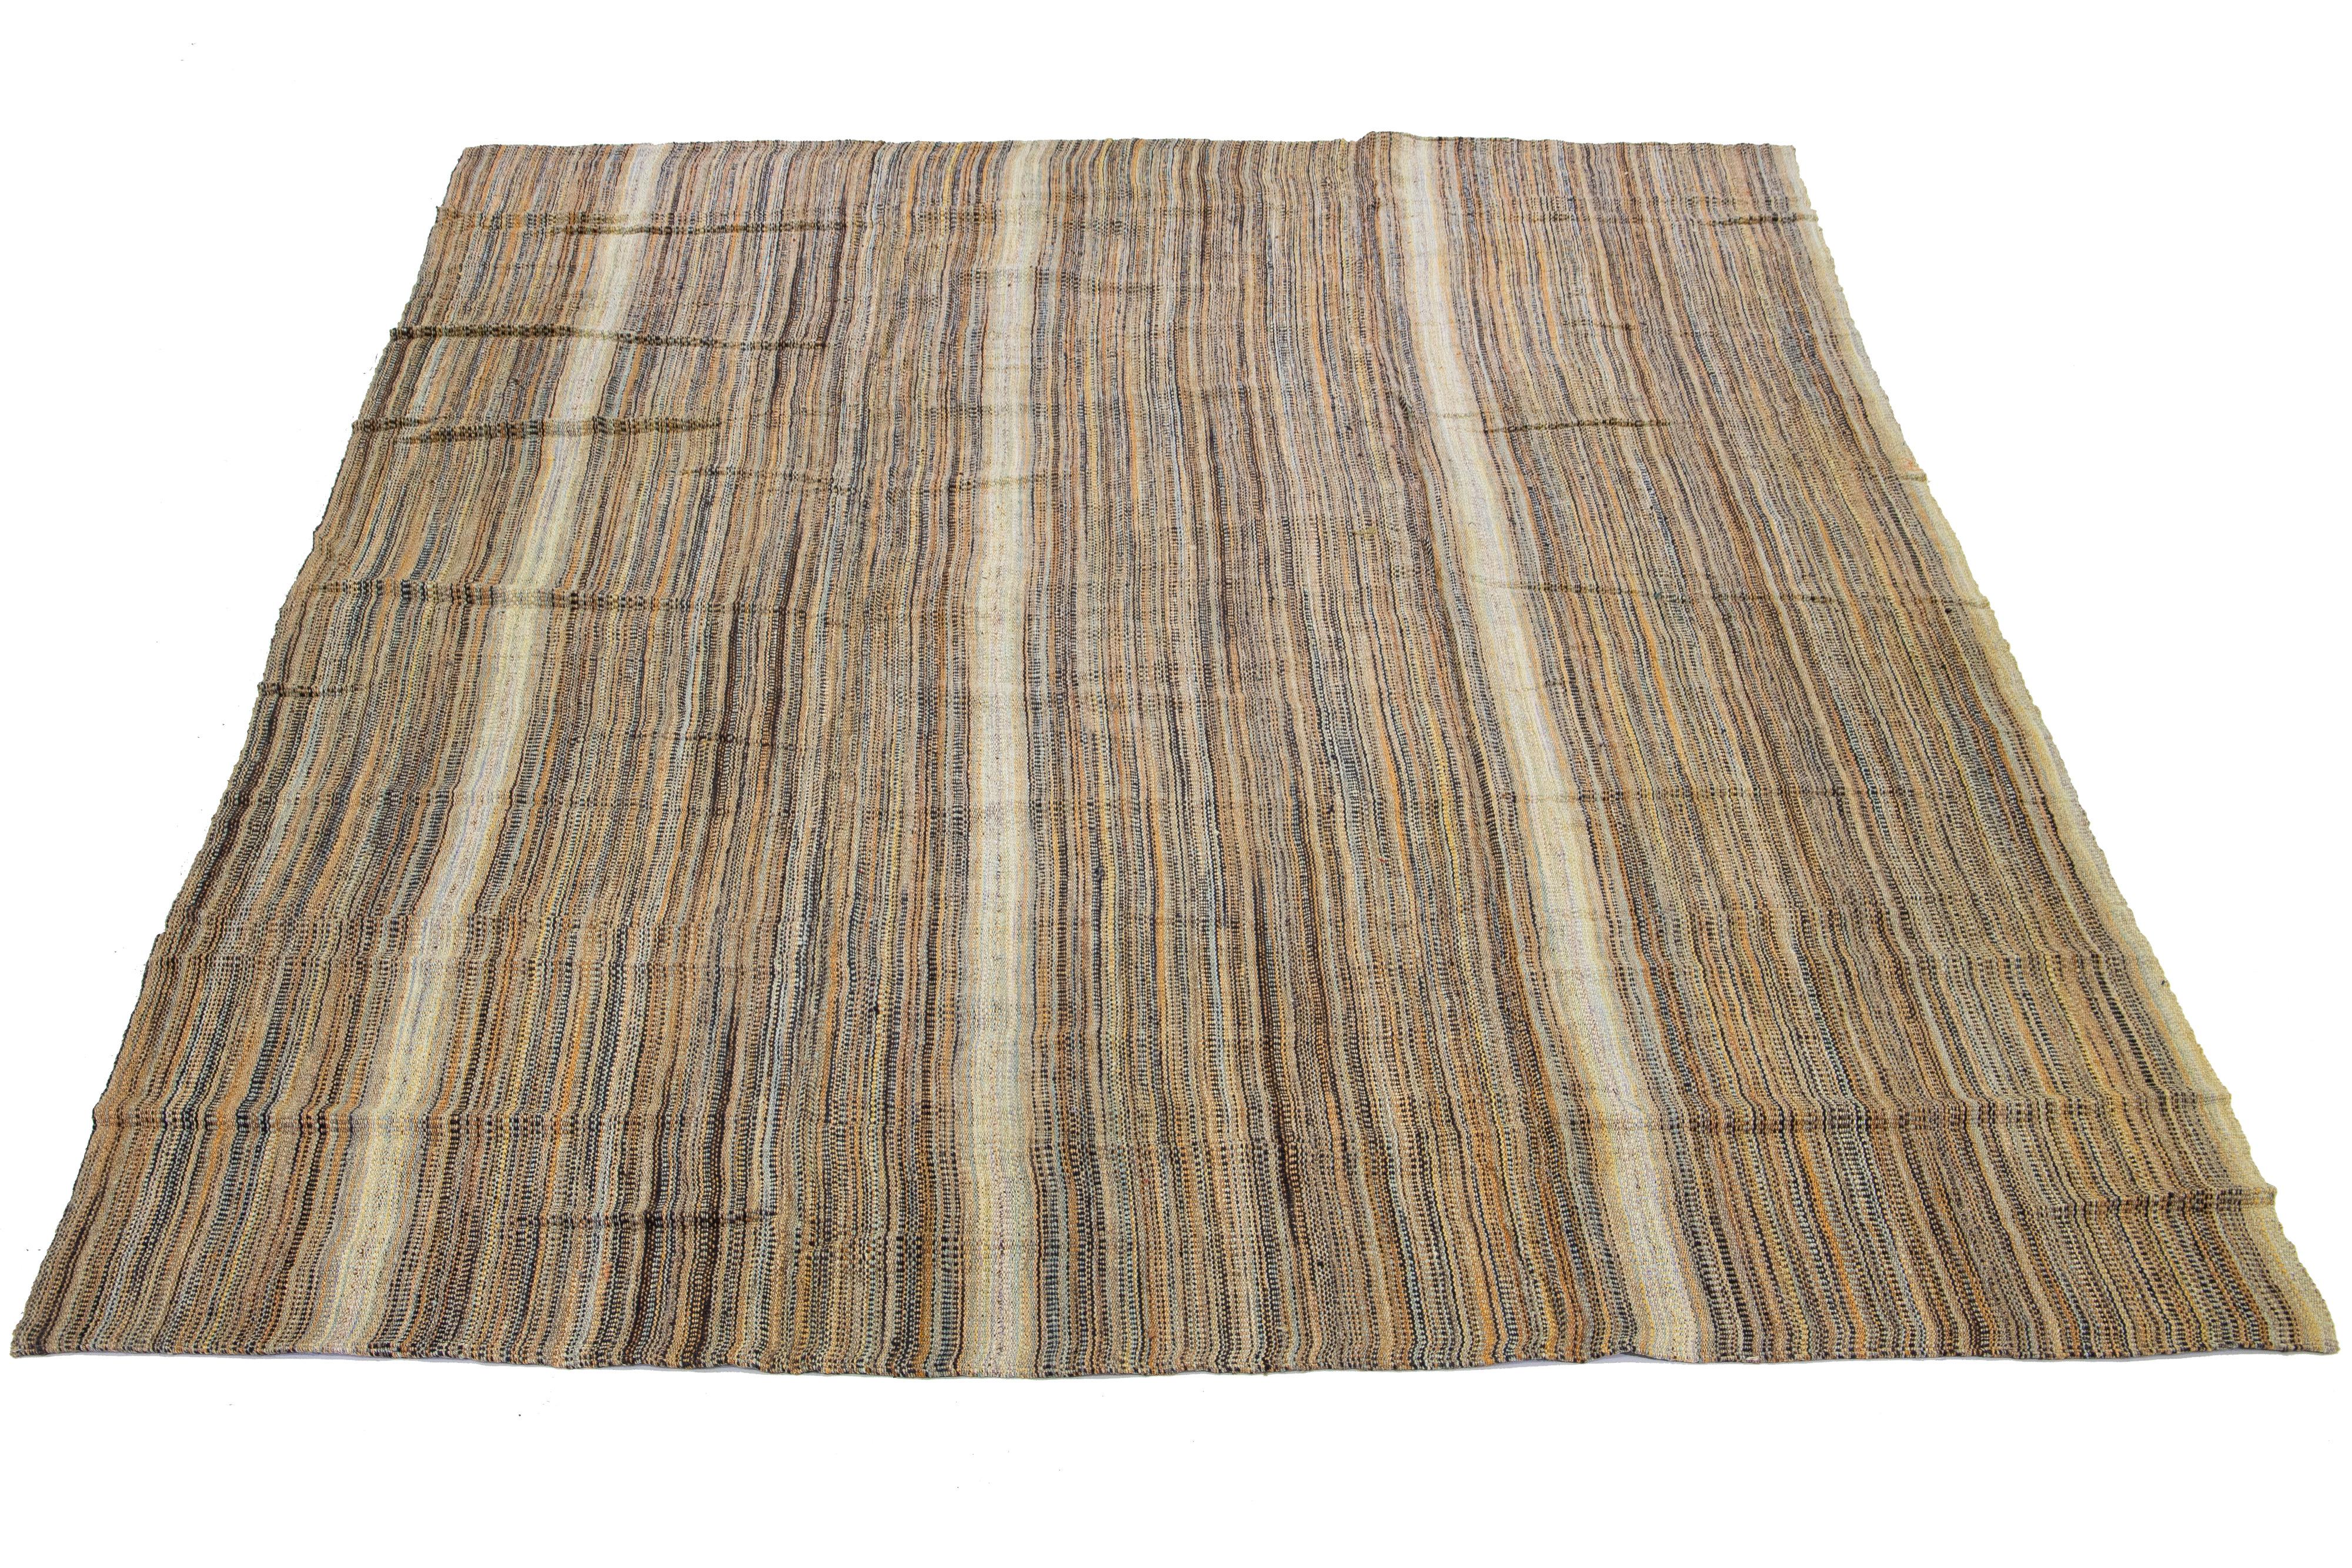 This Indian rug showcases a contemporary Kilim flatweave style crafted from wool. The rug exhibits an elegant striped pattern in beige, tan, and brown shades.

This rug measures 11'8